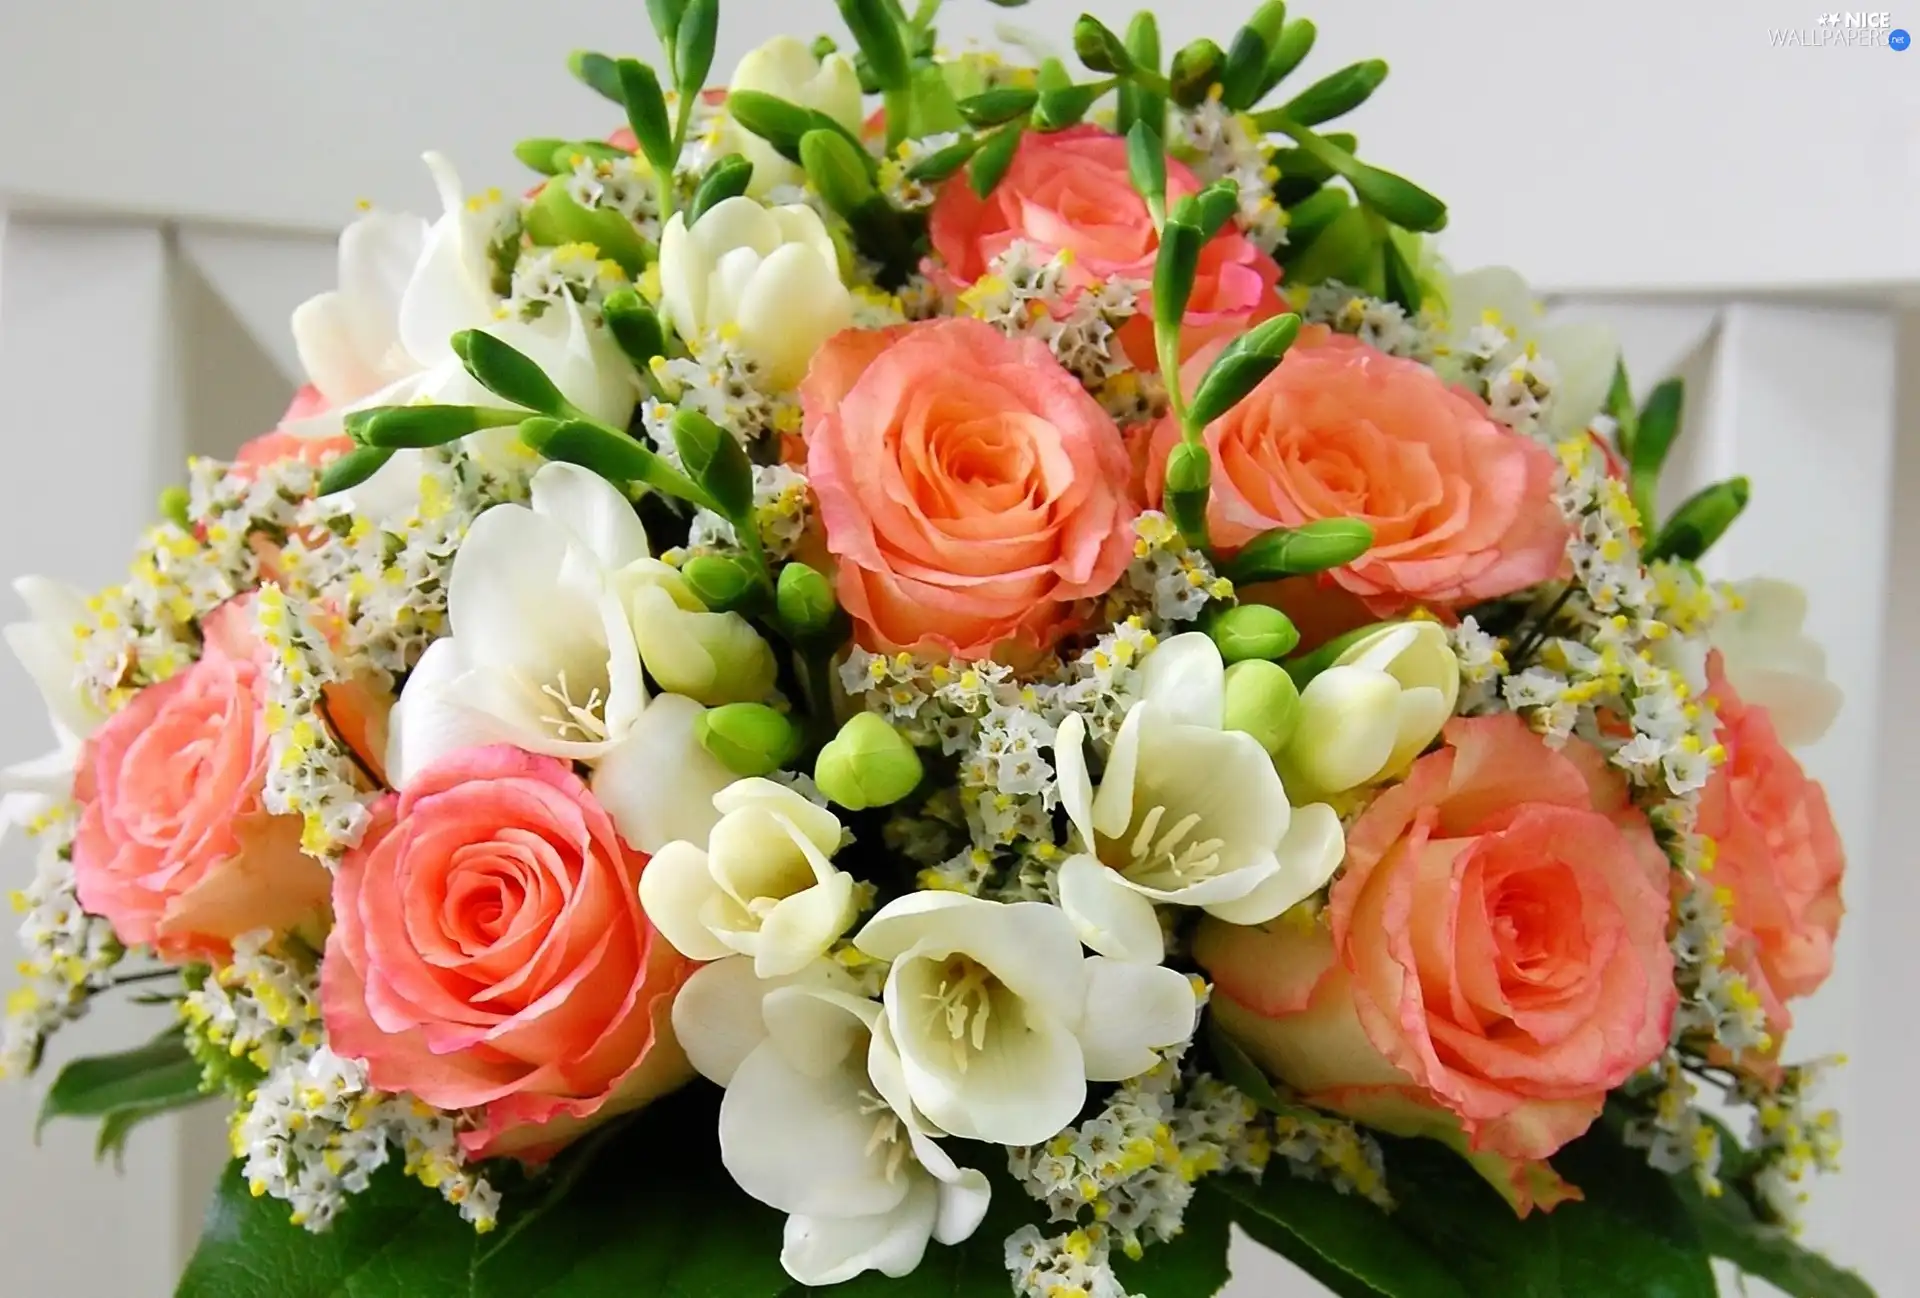 Freesias, roses, Arts, flowers, bouquet